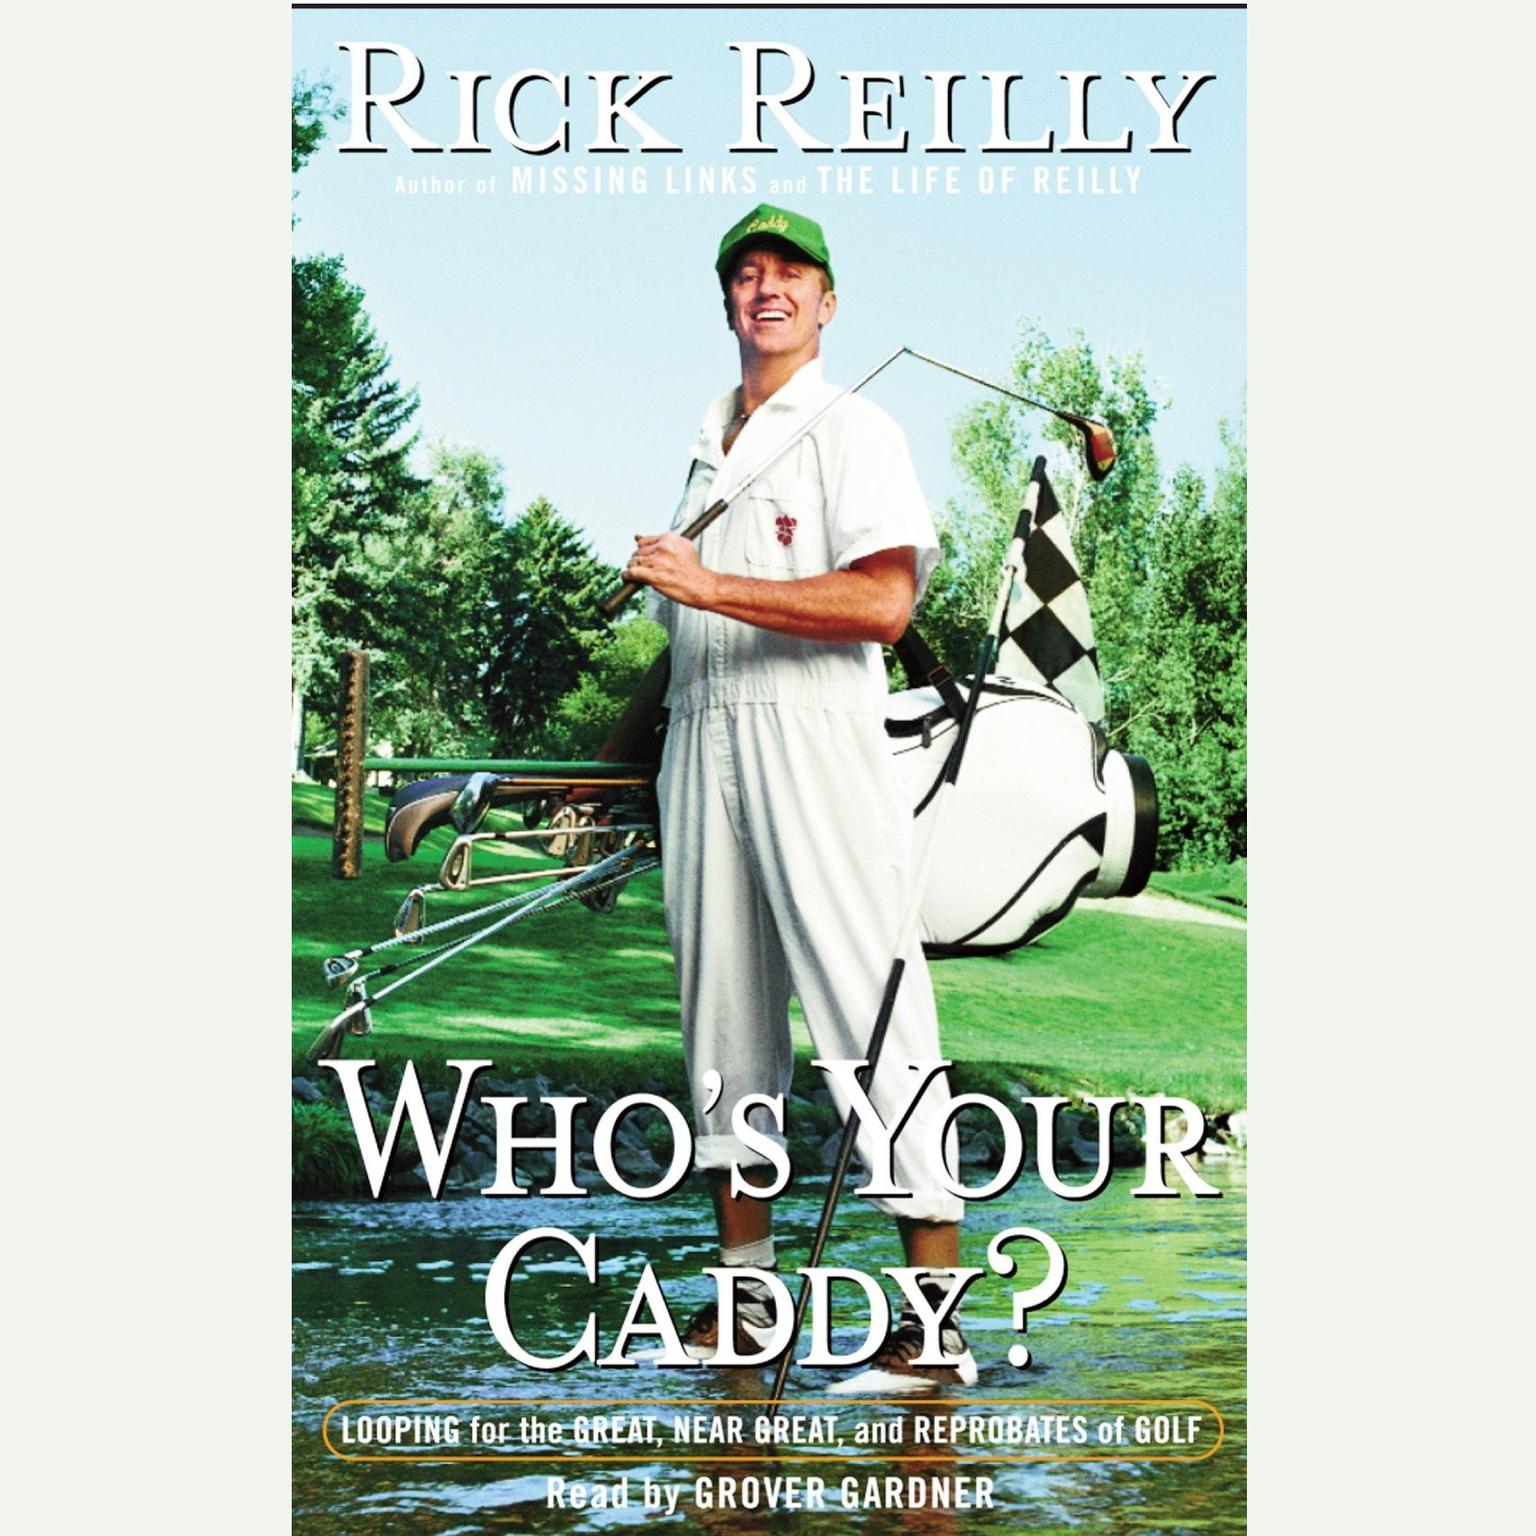 Whos Your Caddy?: Looping For the Great, Near Great and Reprobates of Golf Audiobook, by Rick Reilly